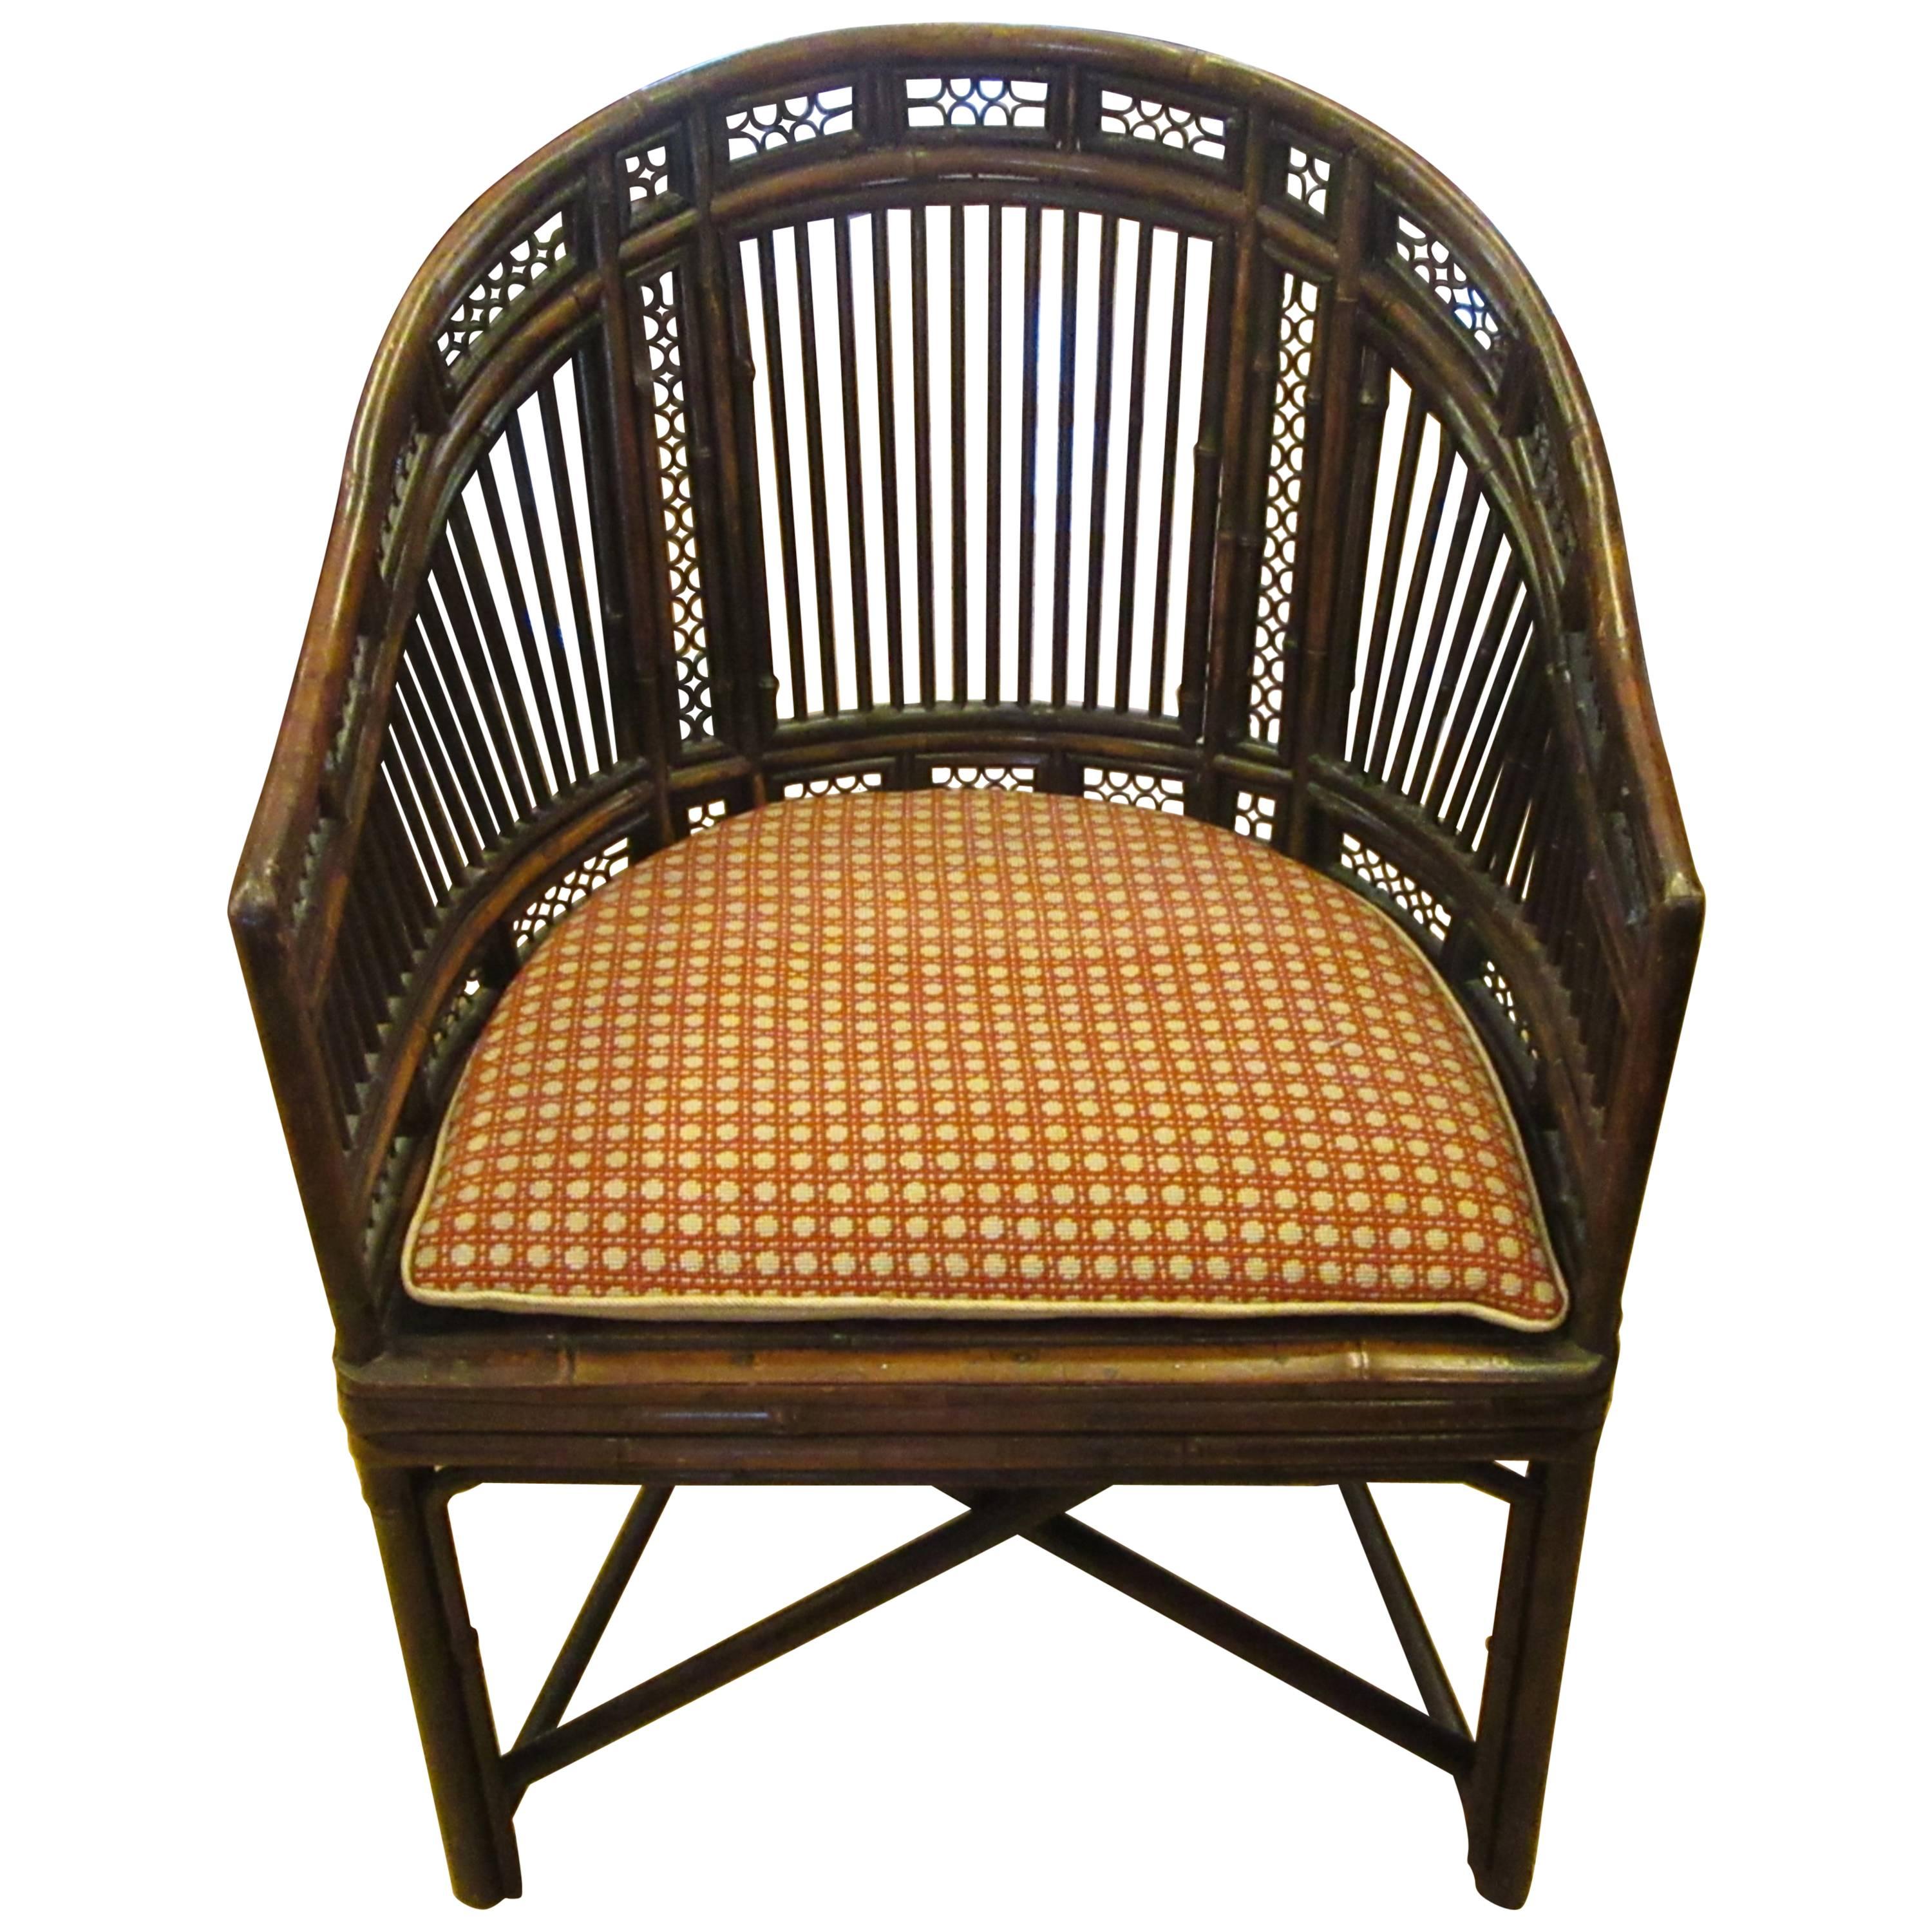 Early 19th Century "Brighton Pavilion" Style Bamboo Armchair